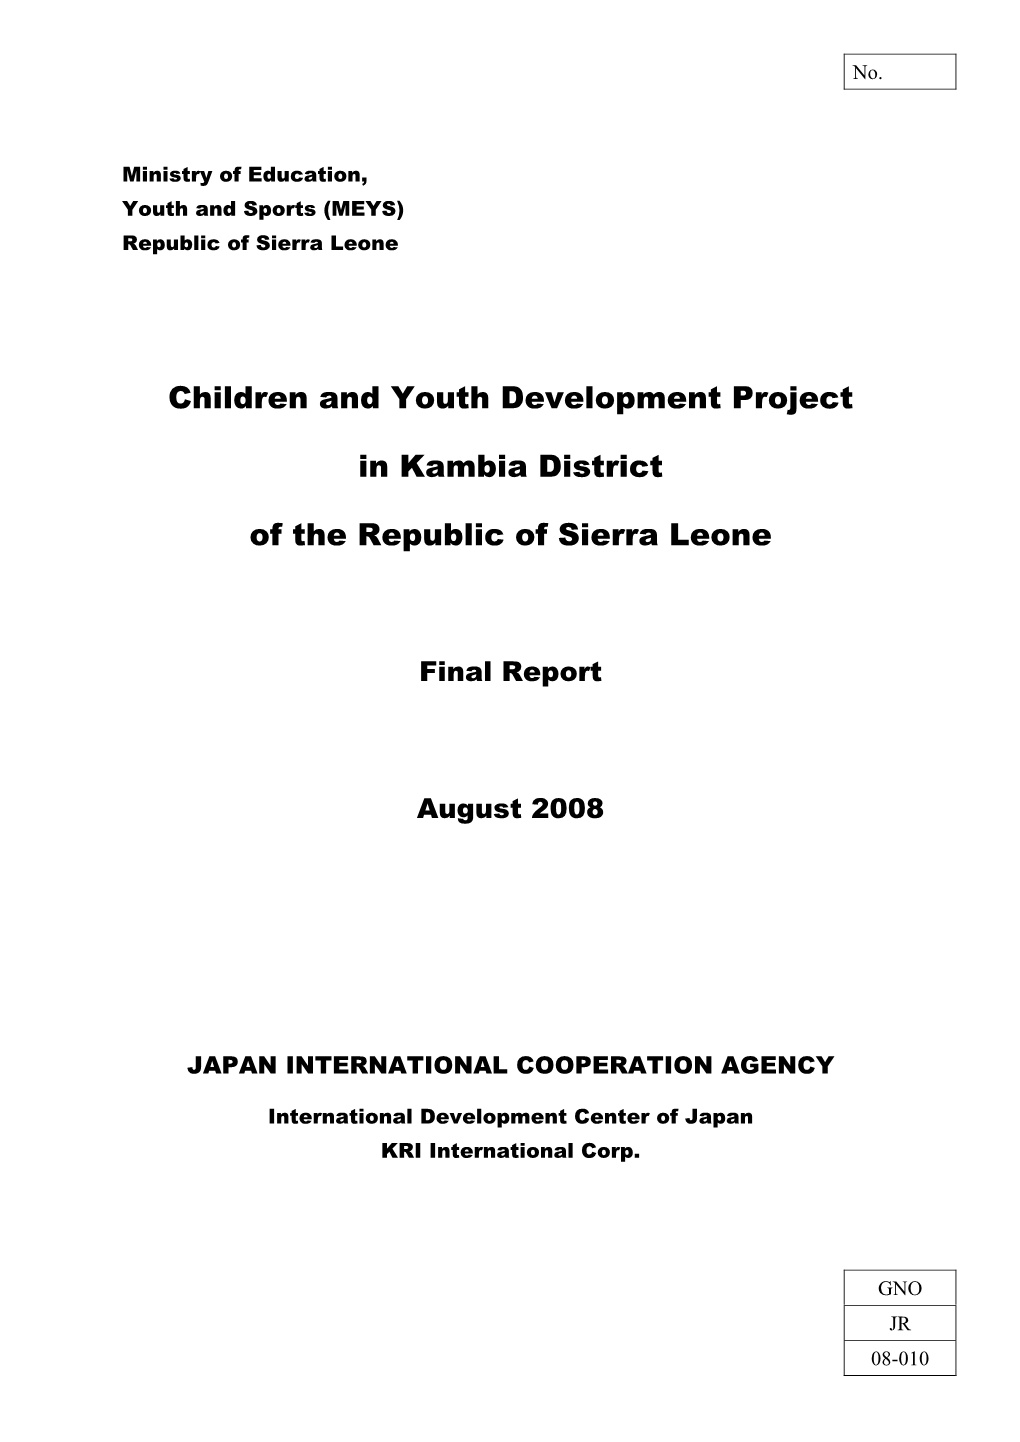 Children and Youth Development Project in Kambia District of the Republic of Sierra Leone (Hereinafter Refereed As the Project)